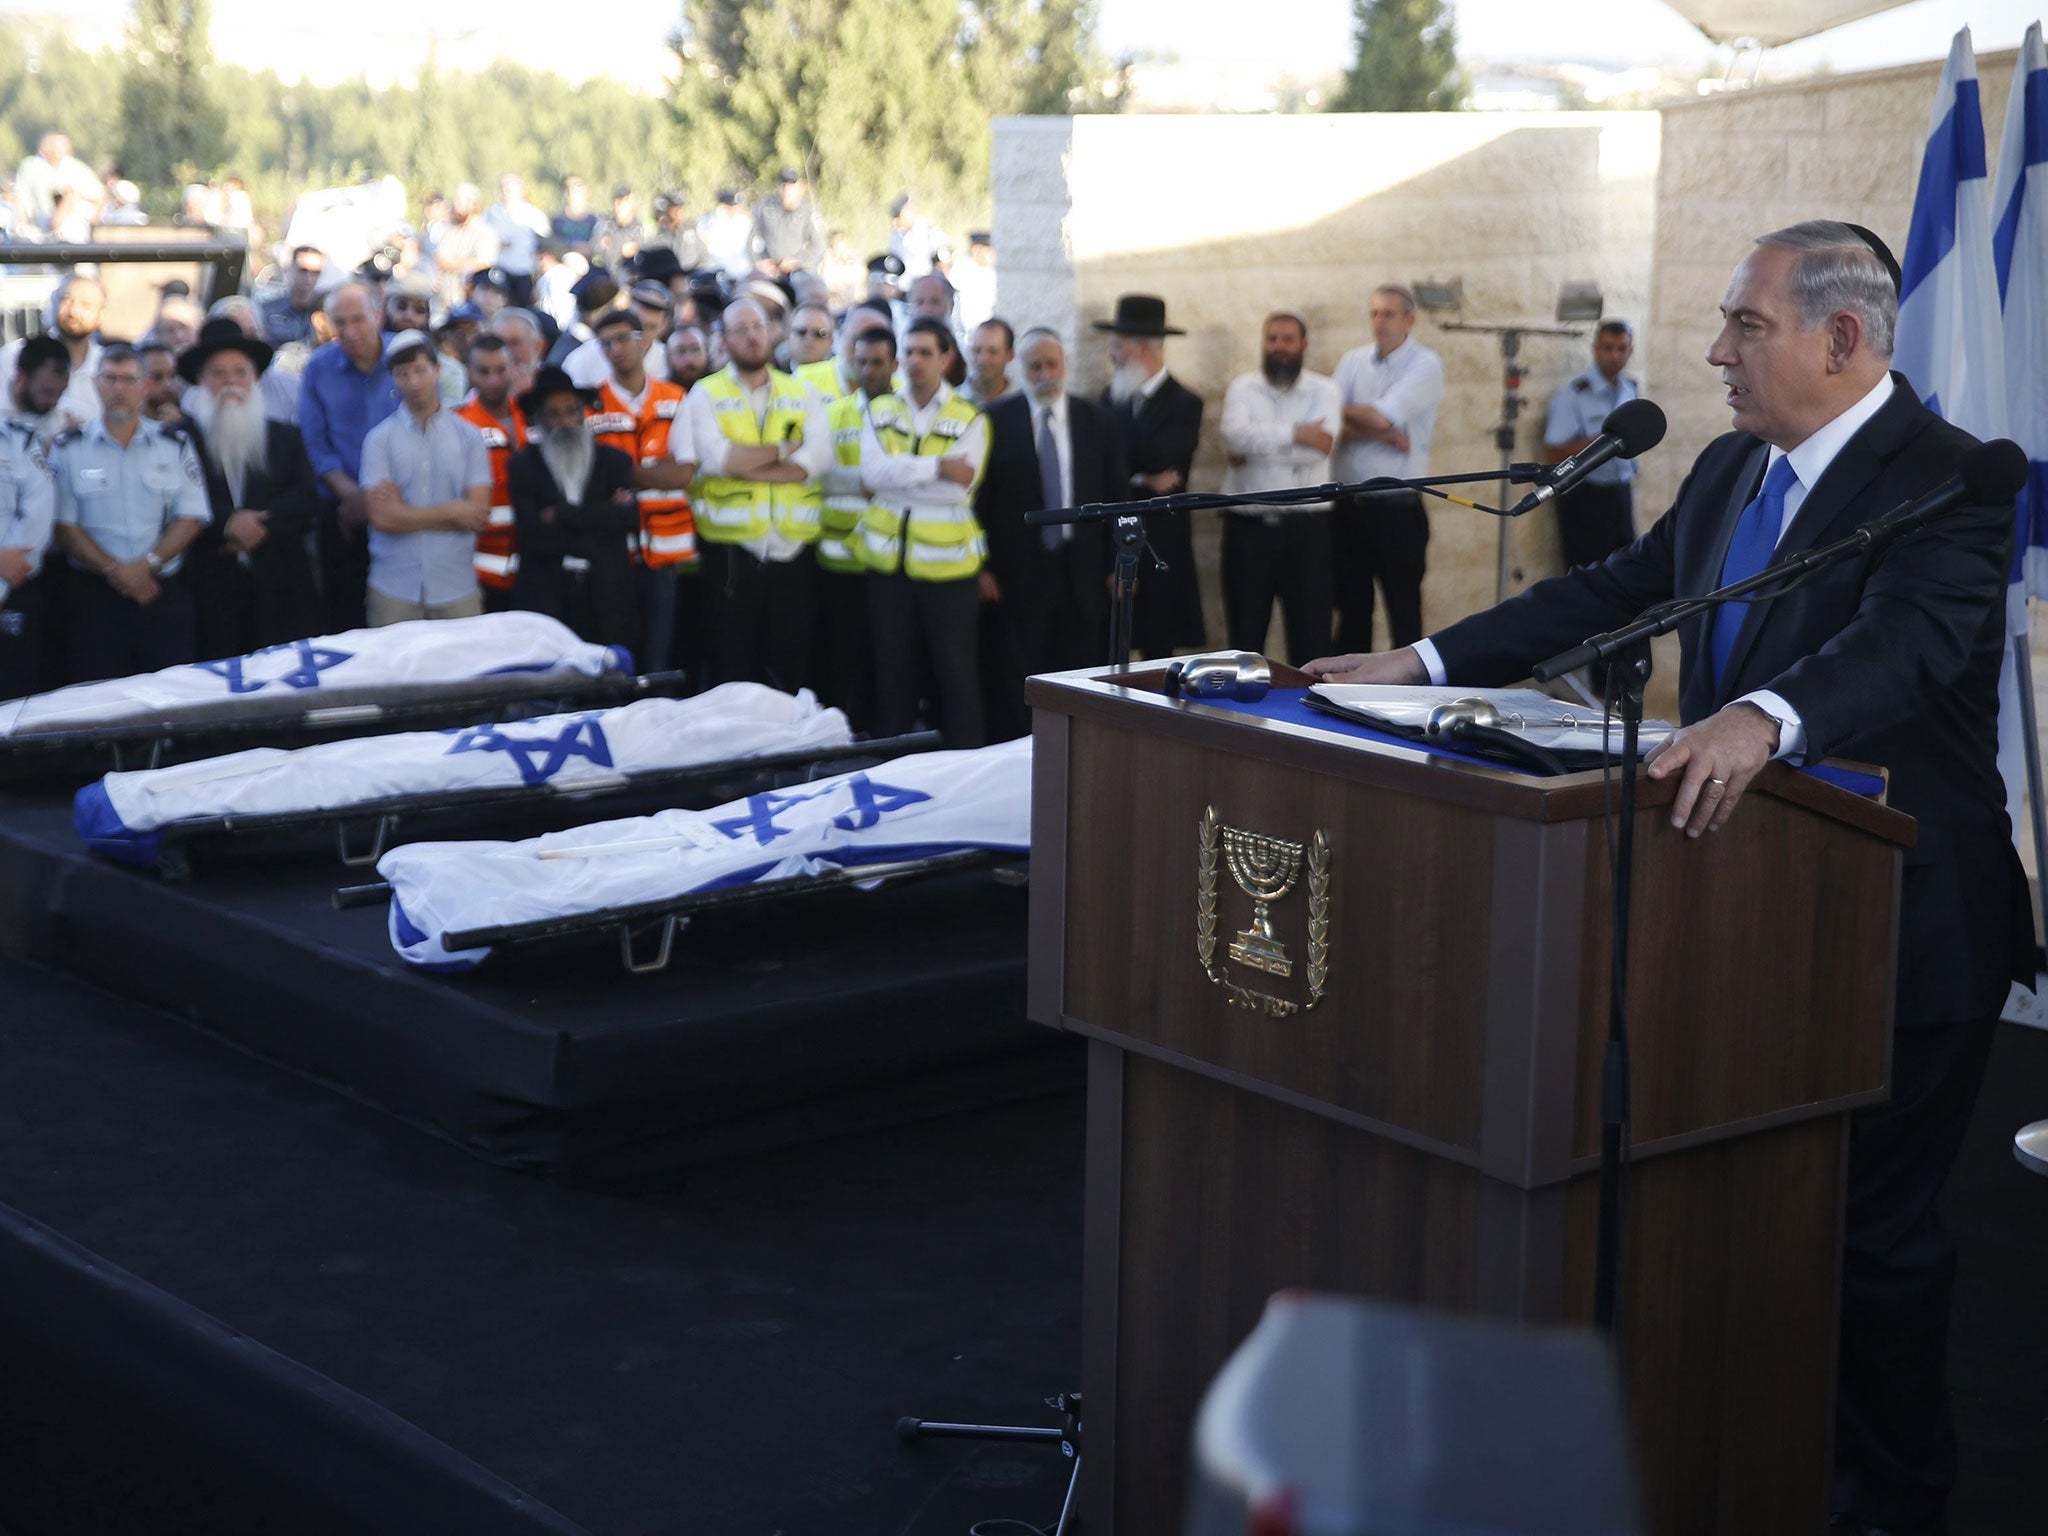 sraeli Prime Minister Benjamin Netanyahu (R) eulogizes three Israeli teens who were abducted and killed in the occupied West Bank, Gil-Ad Shaer, US-Israeli national Naftali Fraenkel, both 16, and Eyal Yifrah, 19, during their joint funeral in the Israeli